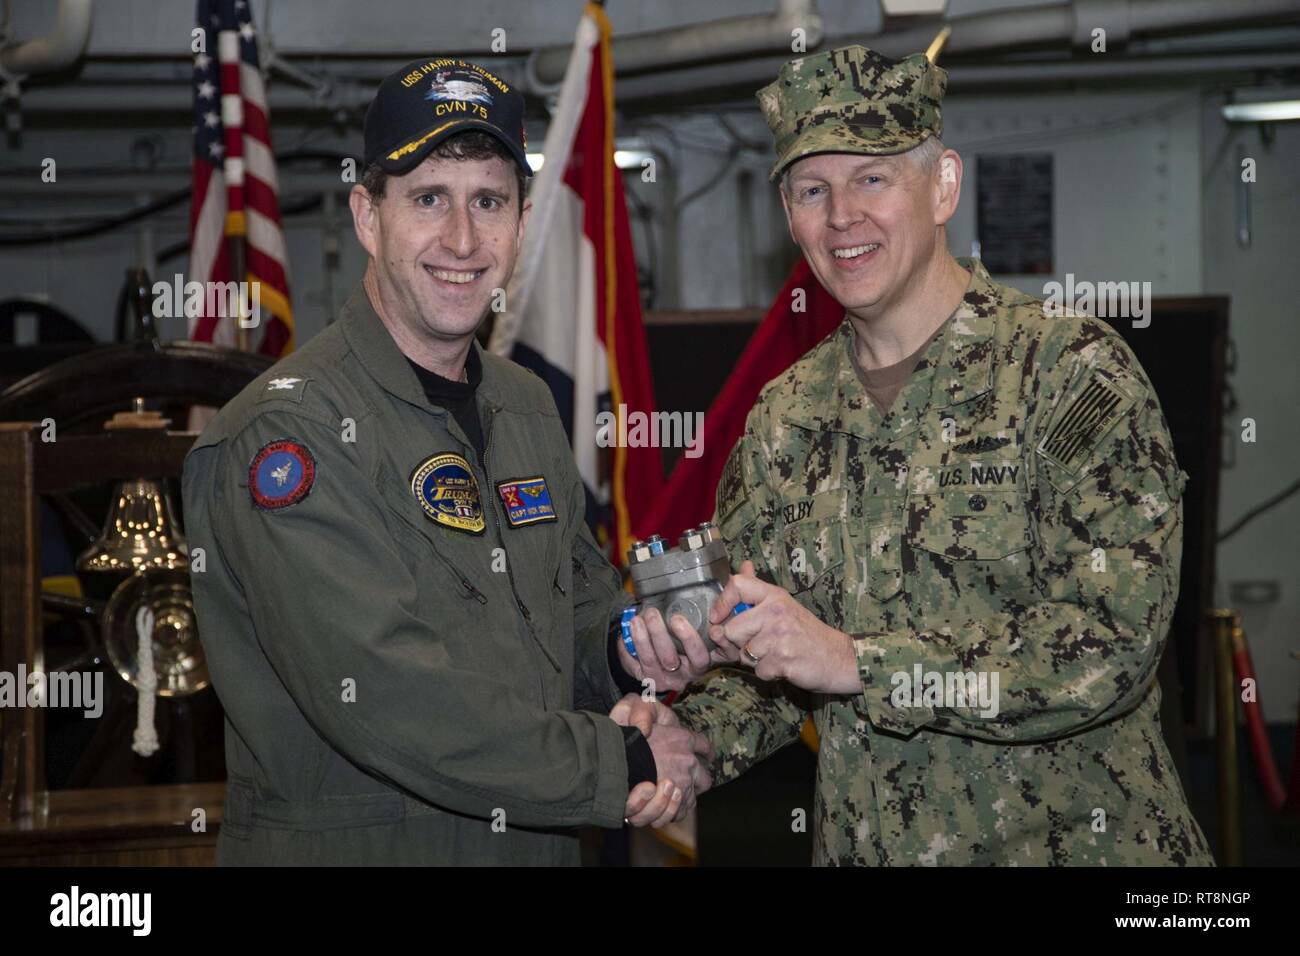 NORFOLK, Va. (Jan. 29, 2019) Naval Sea Systems Command Chief Engineer and Deputy Commander for Ship Design, Integration, and Naval Engineering, Rear Adm. Lorin Selby, right, presents USS Harry S. Truman (CVN 75) Commanding Officer, Capt. Nicholas Dienna, with the first 3-D printed metal part for installation and use on a U.S. Navy aircraft carrier. The piping assembly, manufactured by Huntington Ingalls Industries, will be installed and evaluated for a one-year period. Stock Photo